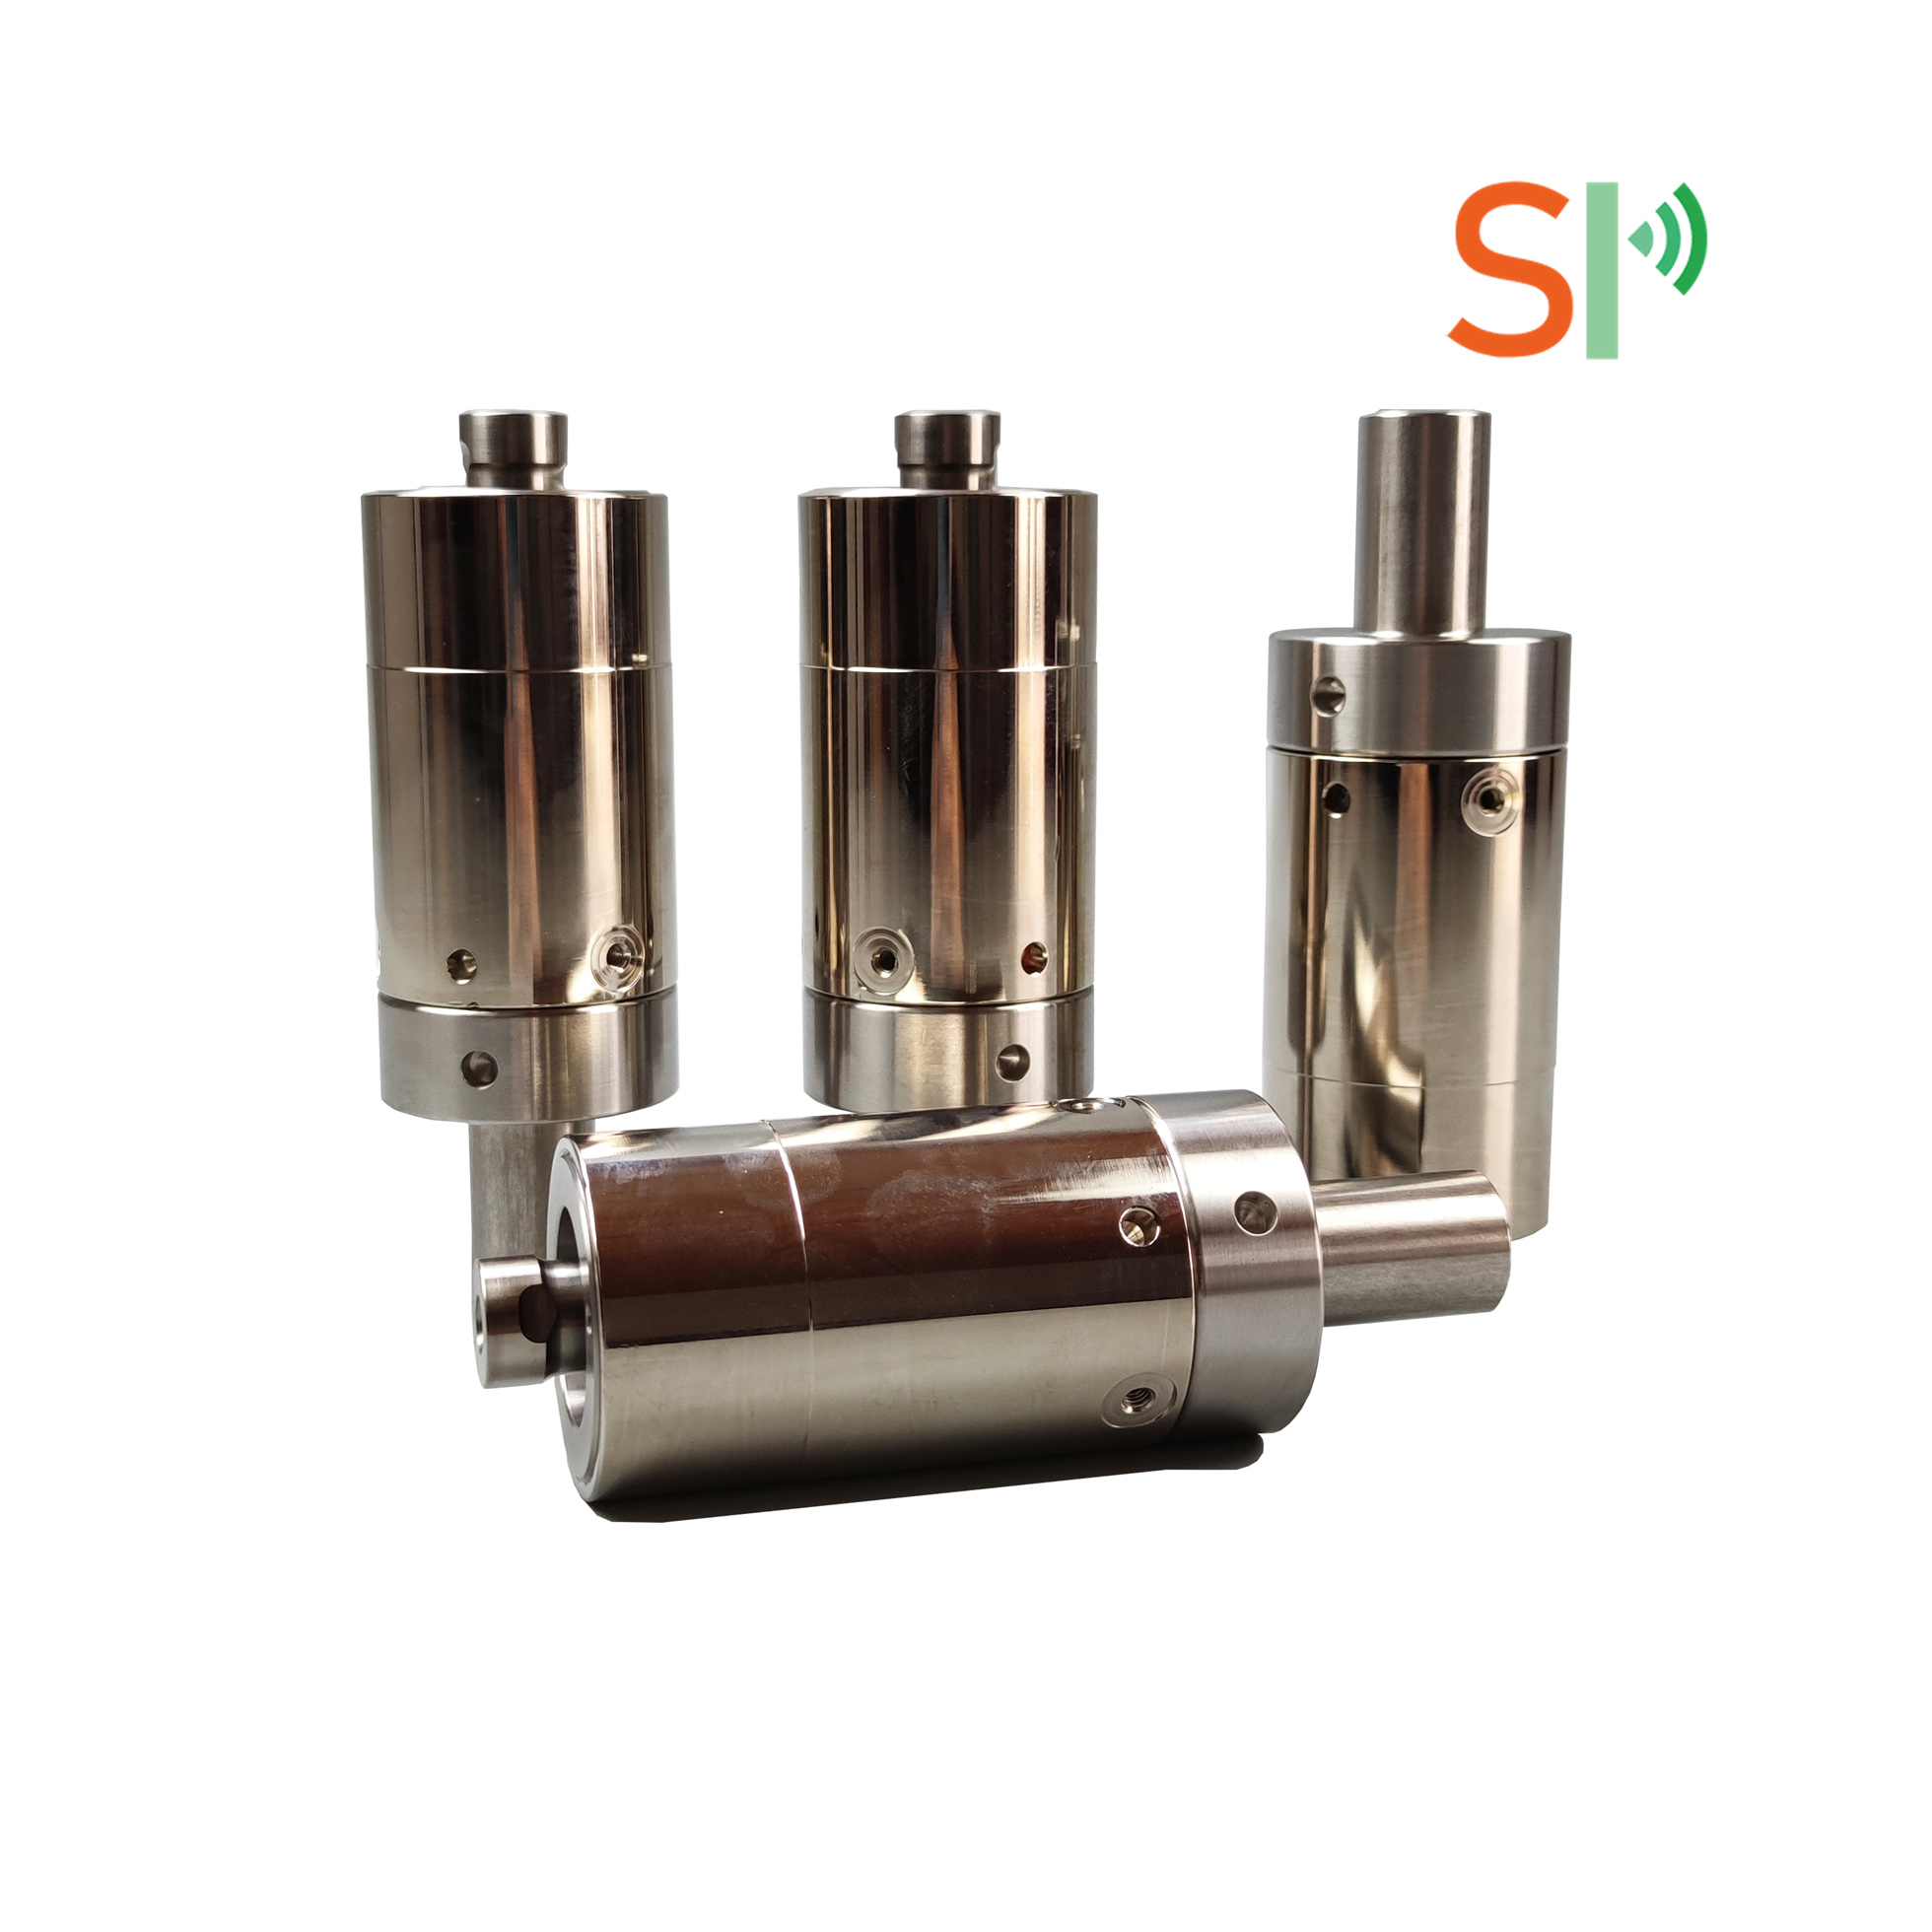 High Quality Ultrasonic Welding Transducer Branson 4TP Replacement